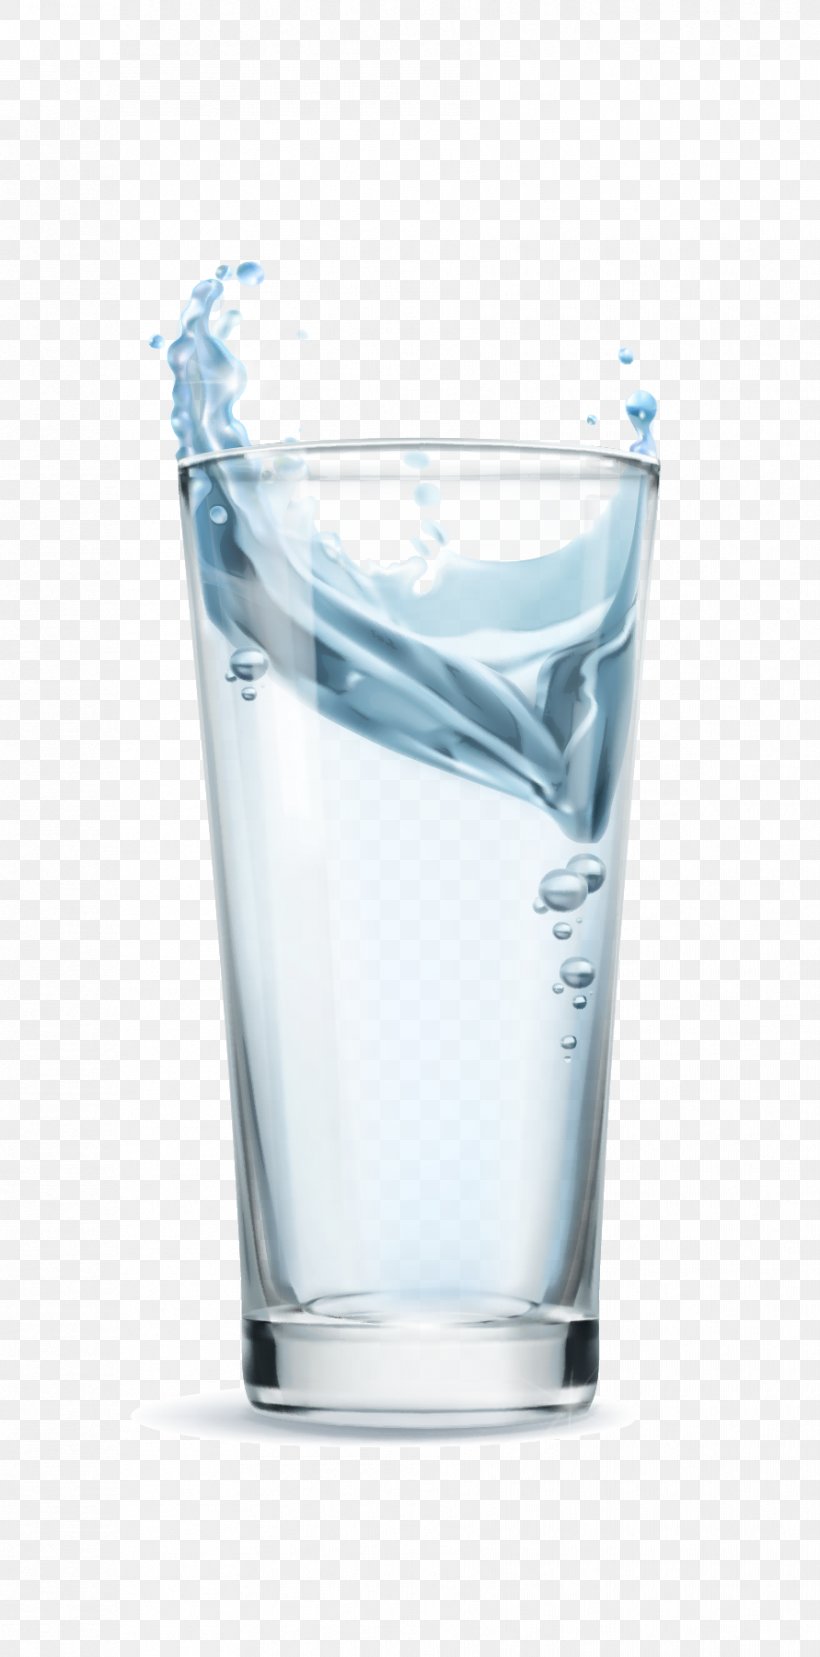 A Glass Of Water Vector Material, PNG, 891x1801px, Water, Cup, Drinkware, Drop, Glass Download Free